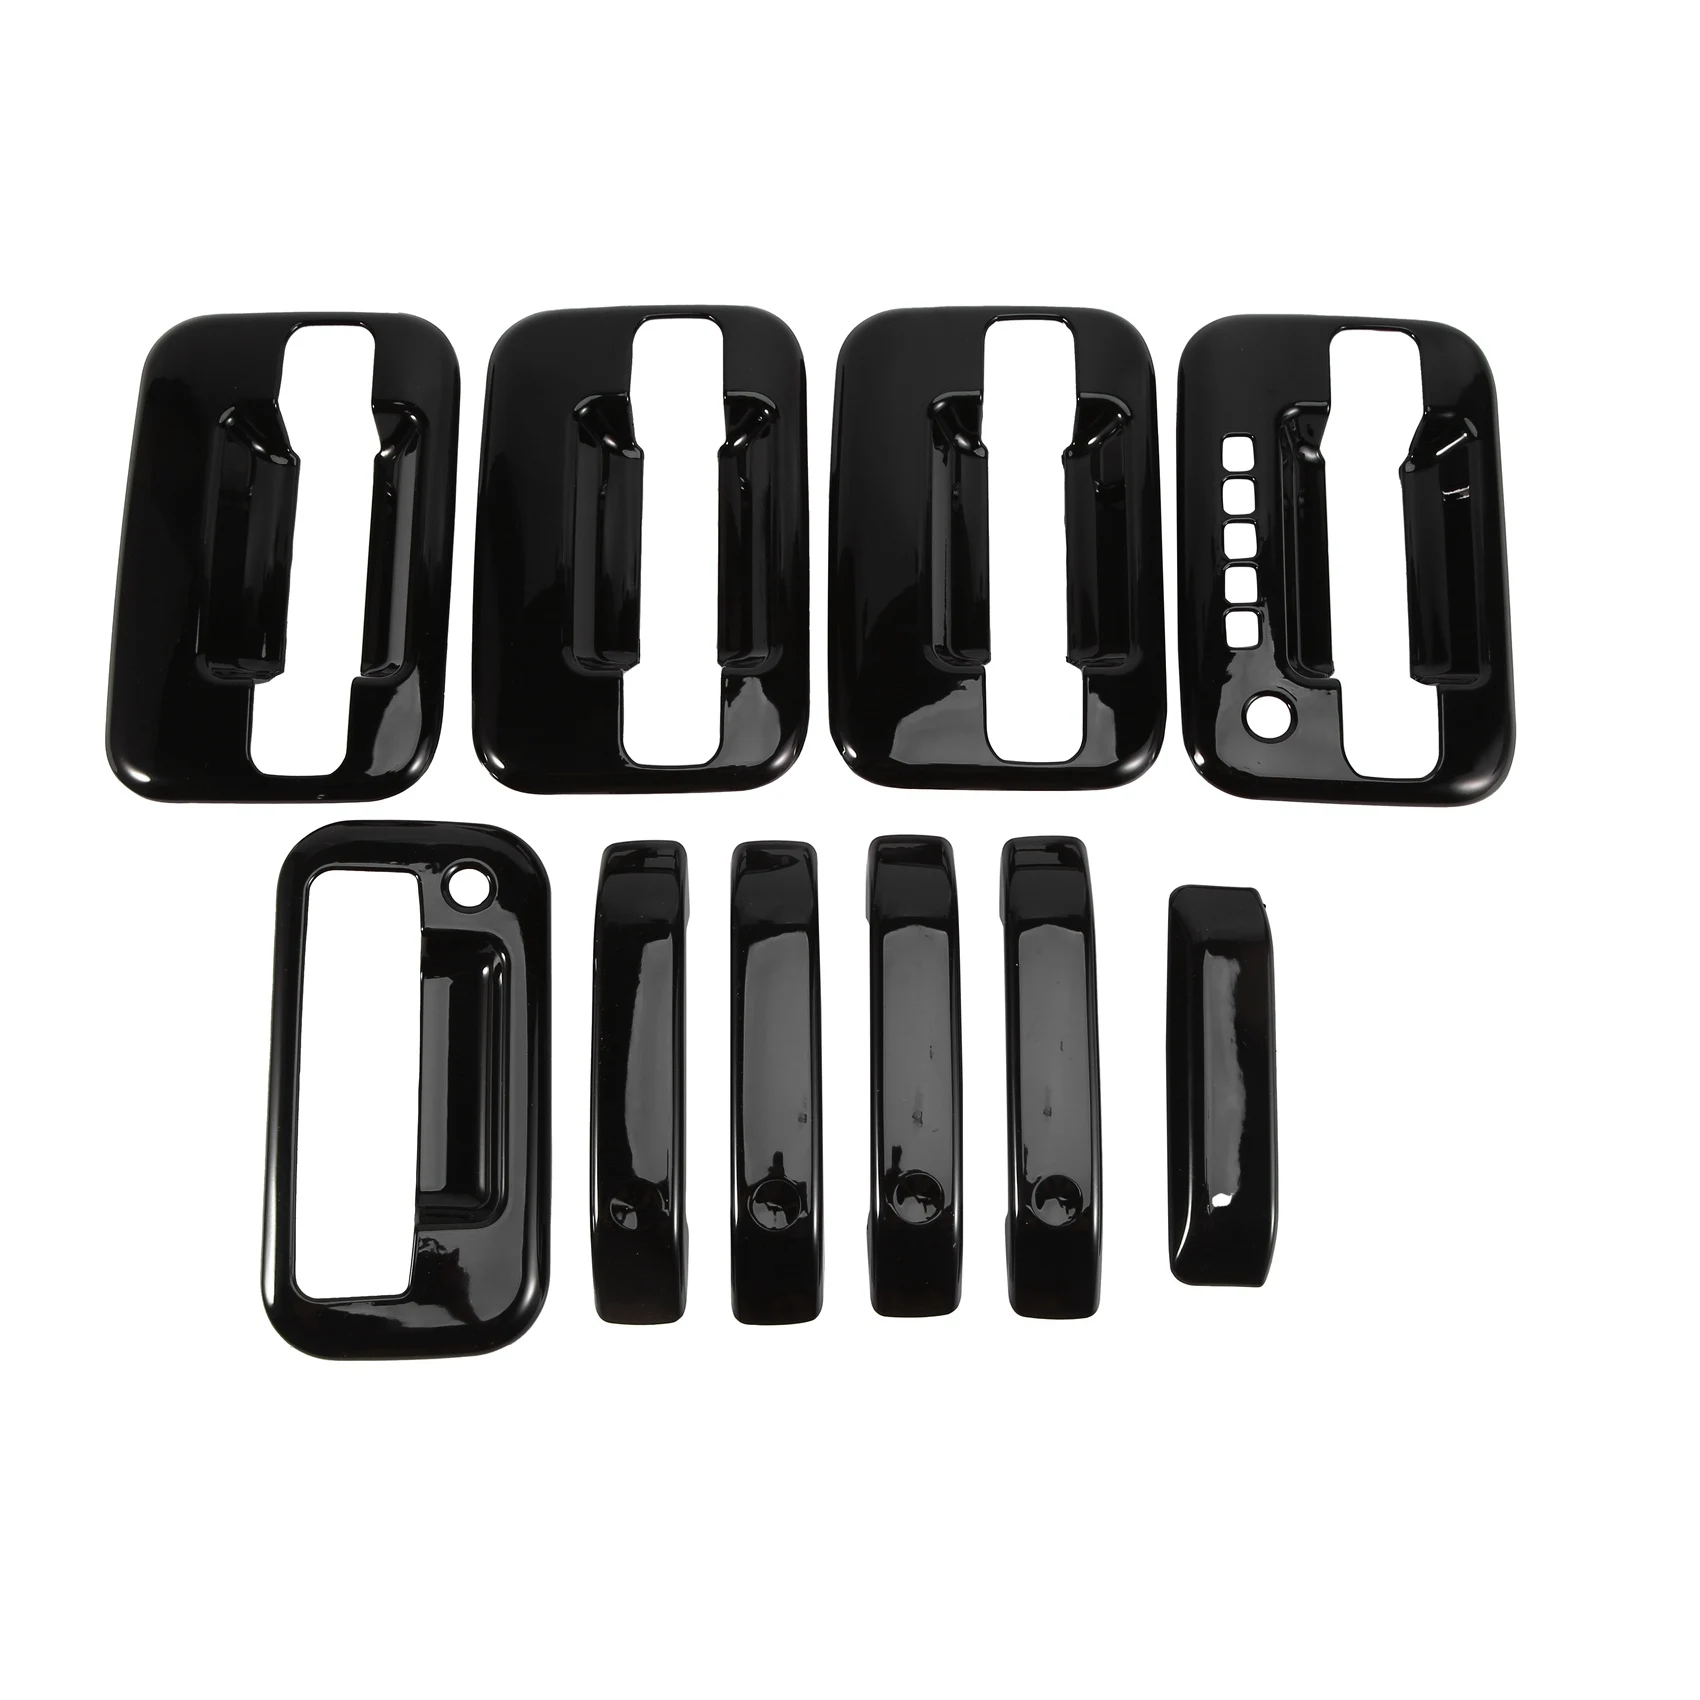 

External Door Handle Covers with Keypad & Tailgate Cover with Keyhole for 2004-2019 Ford F-150 F150 Glossy Black